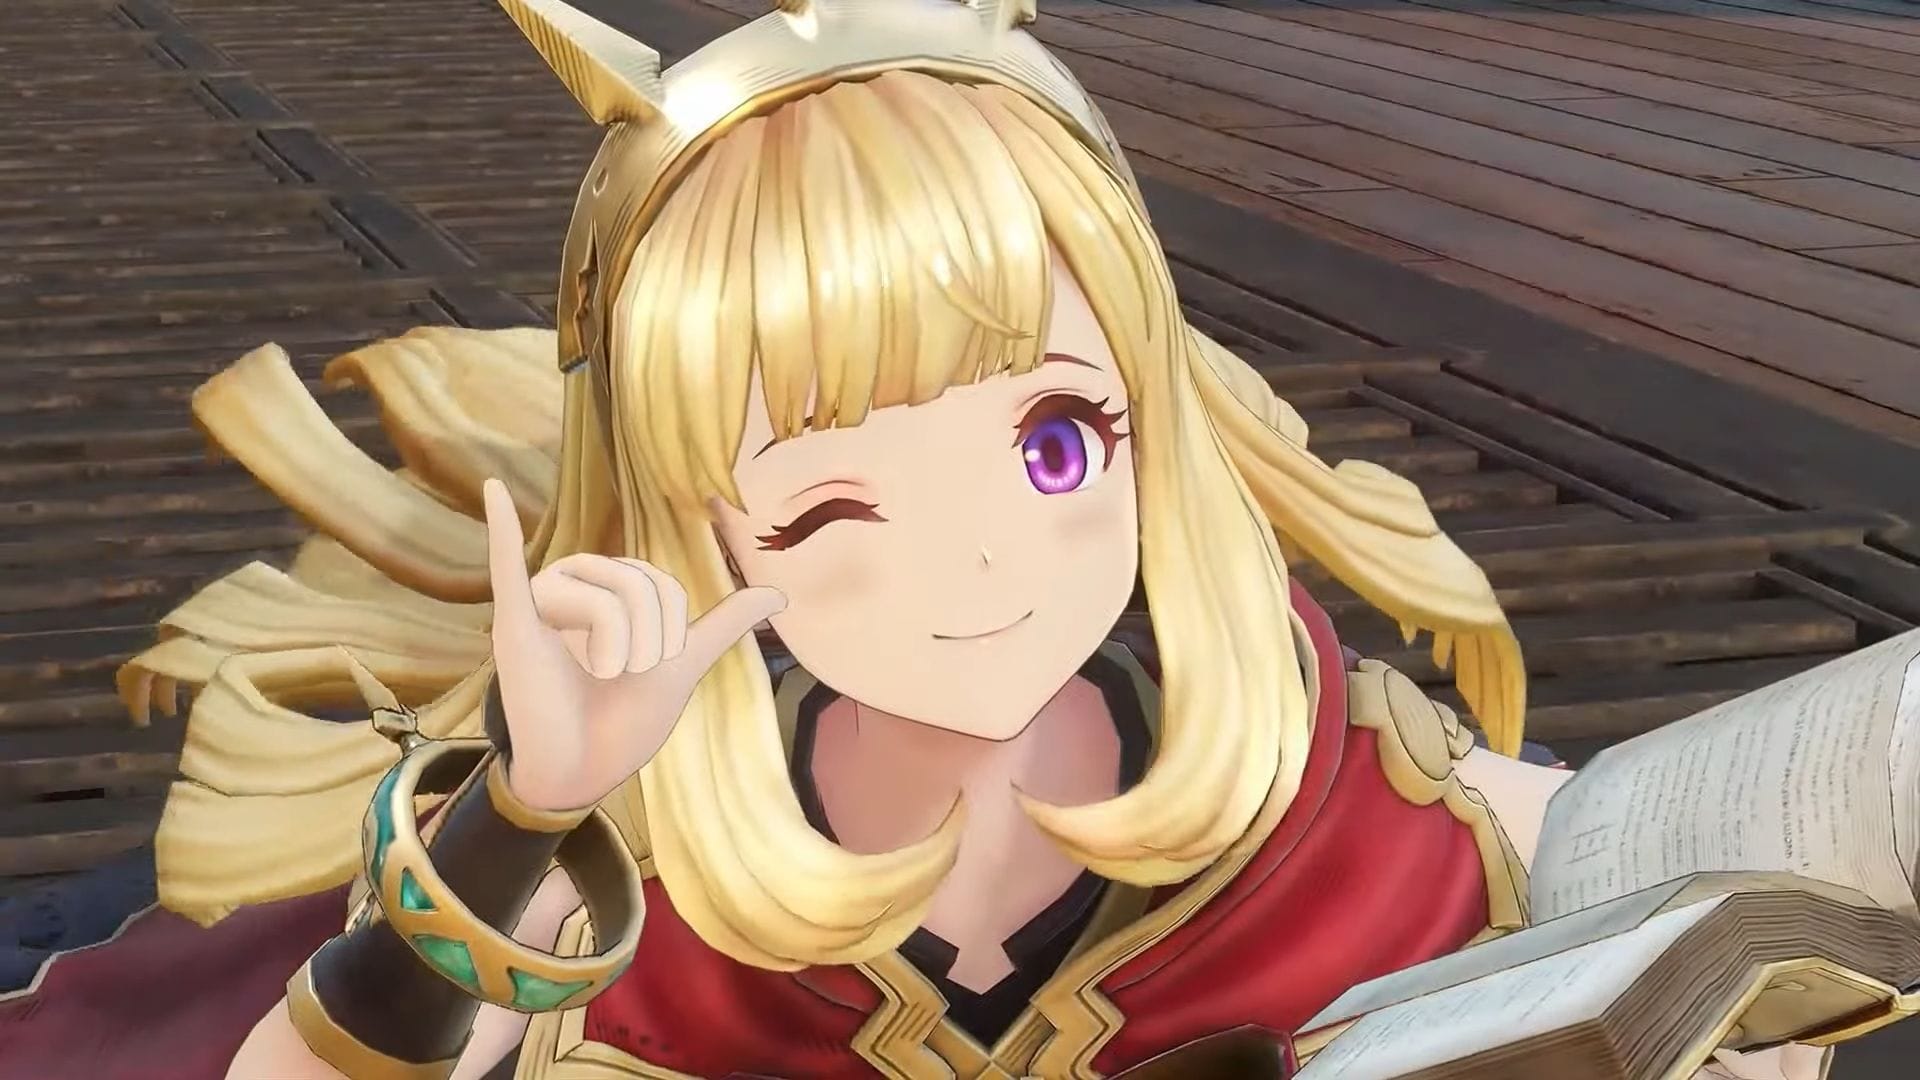 Granblue Fantasy: Relink Getting Demo for PS5 and PS4, Playable Cagliostro, Saefon, and Tweyen